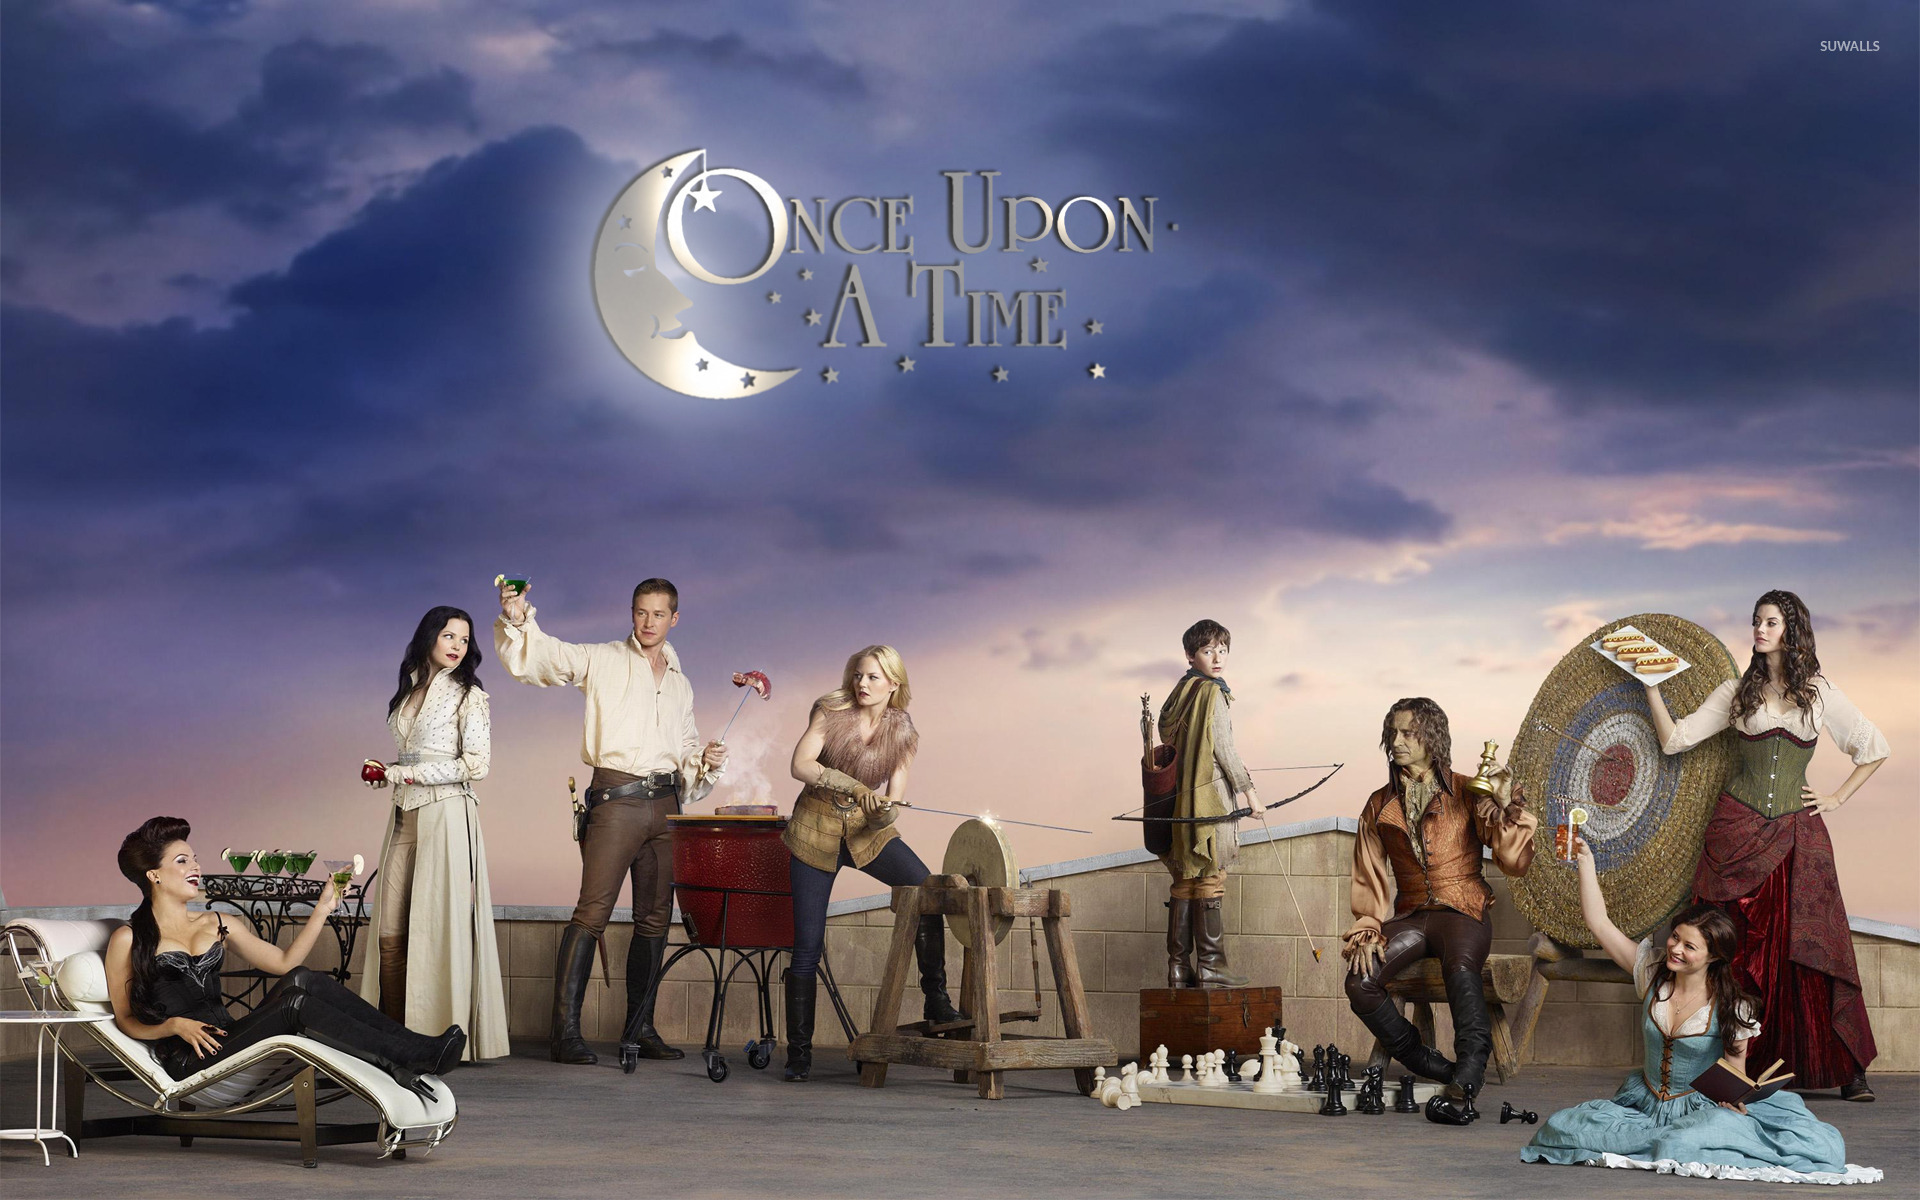 Once Upon A Time Wallpaper 2 by AvrilSk8teuse on DeviantArt